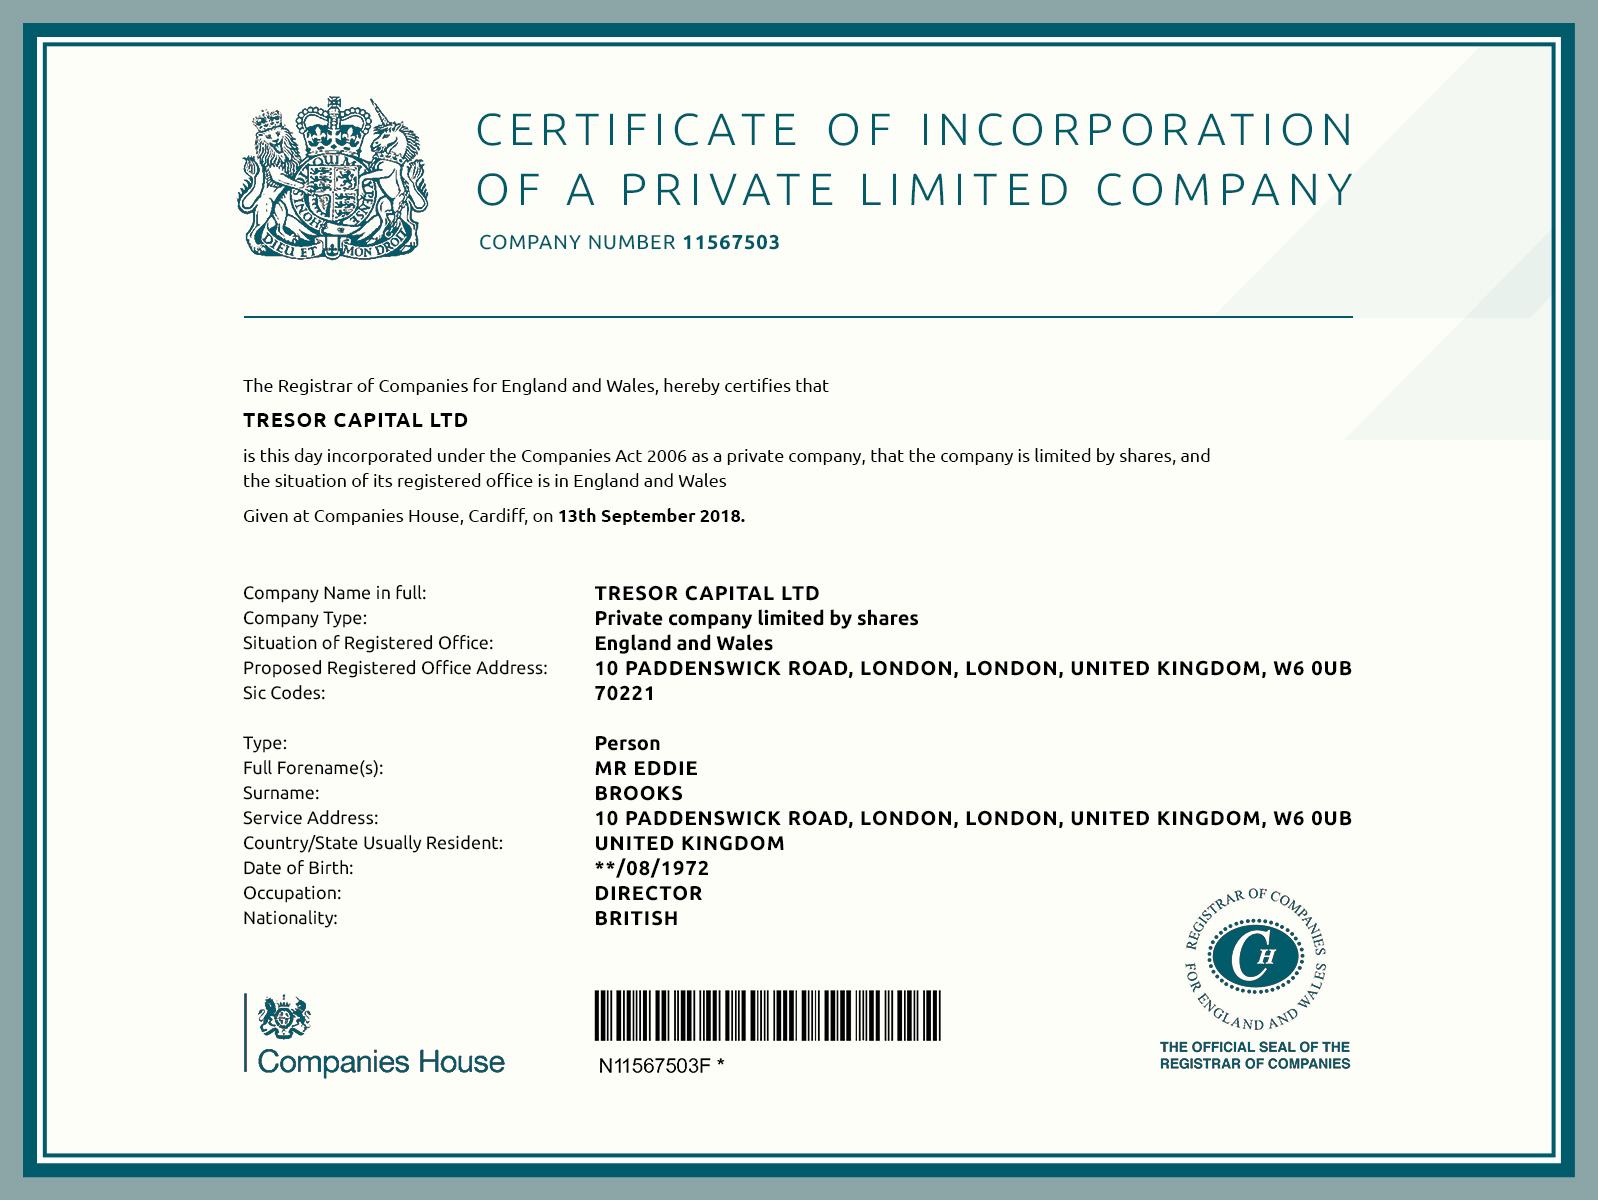 Url certificate. Limited Company. Certificate of Incorporation. Company Registration number uk. Company Certificate uk.